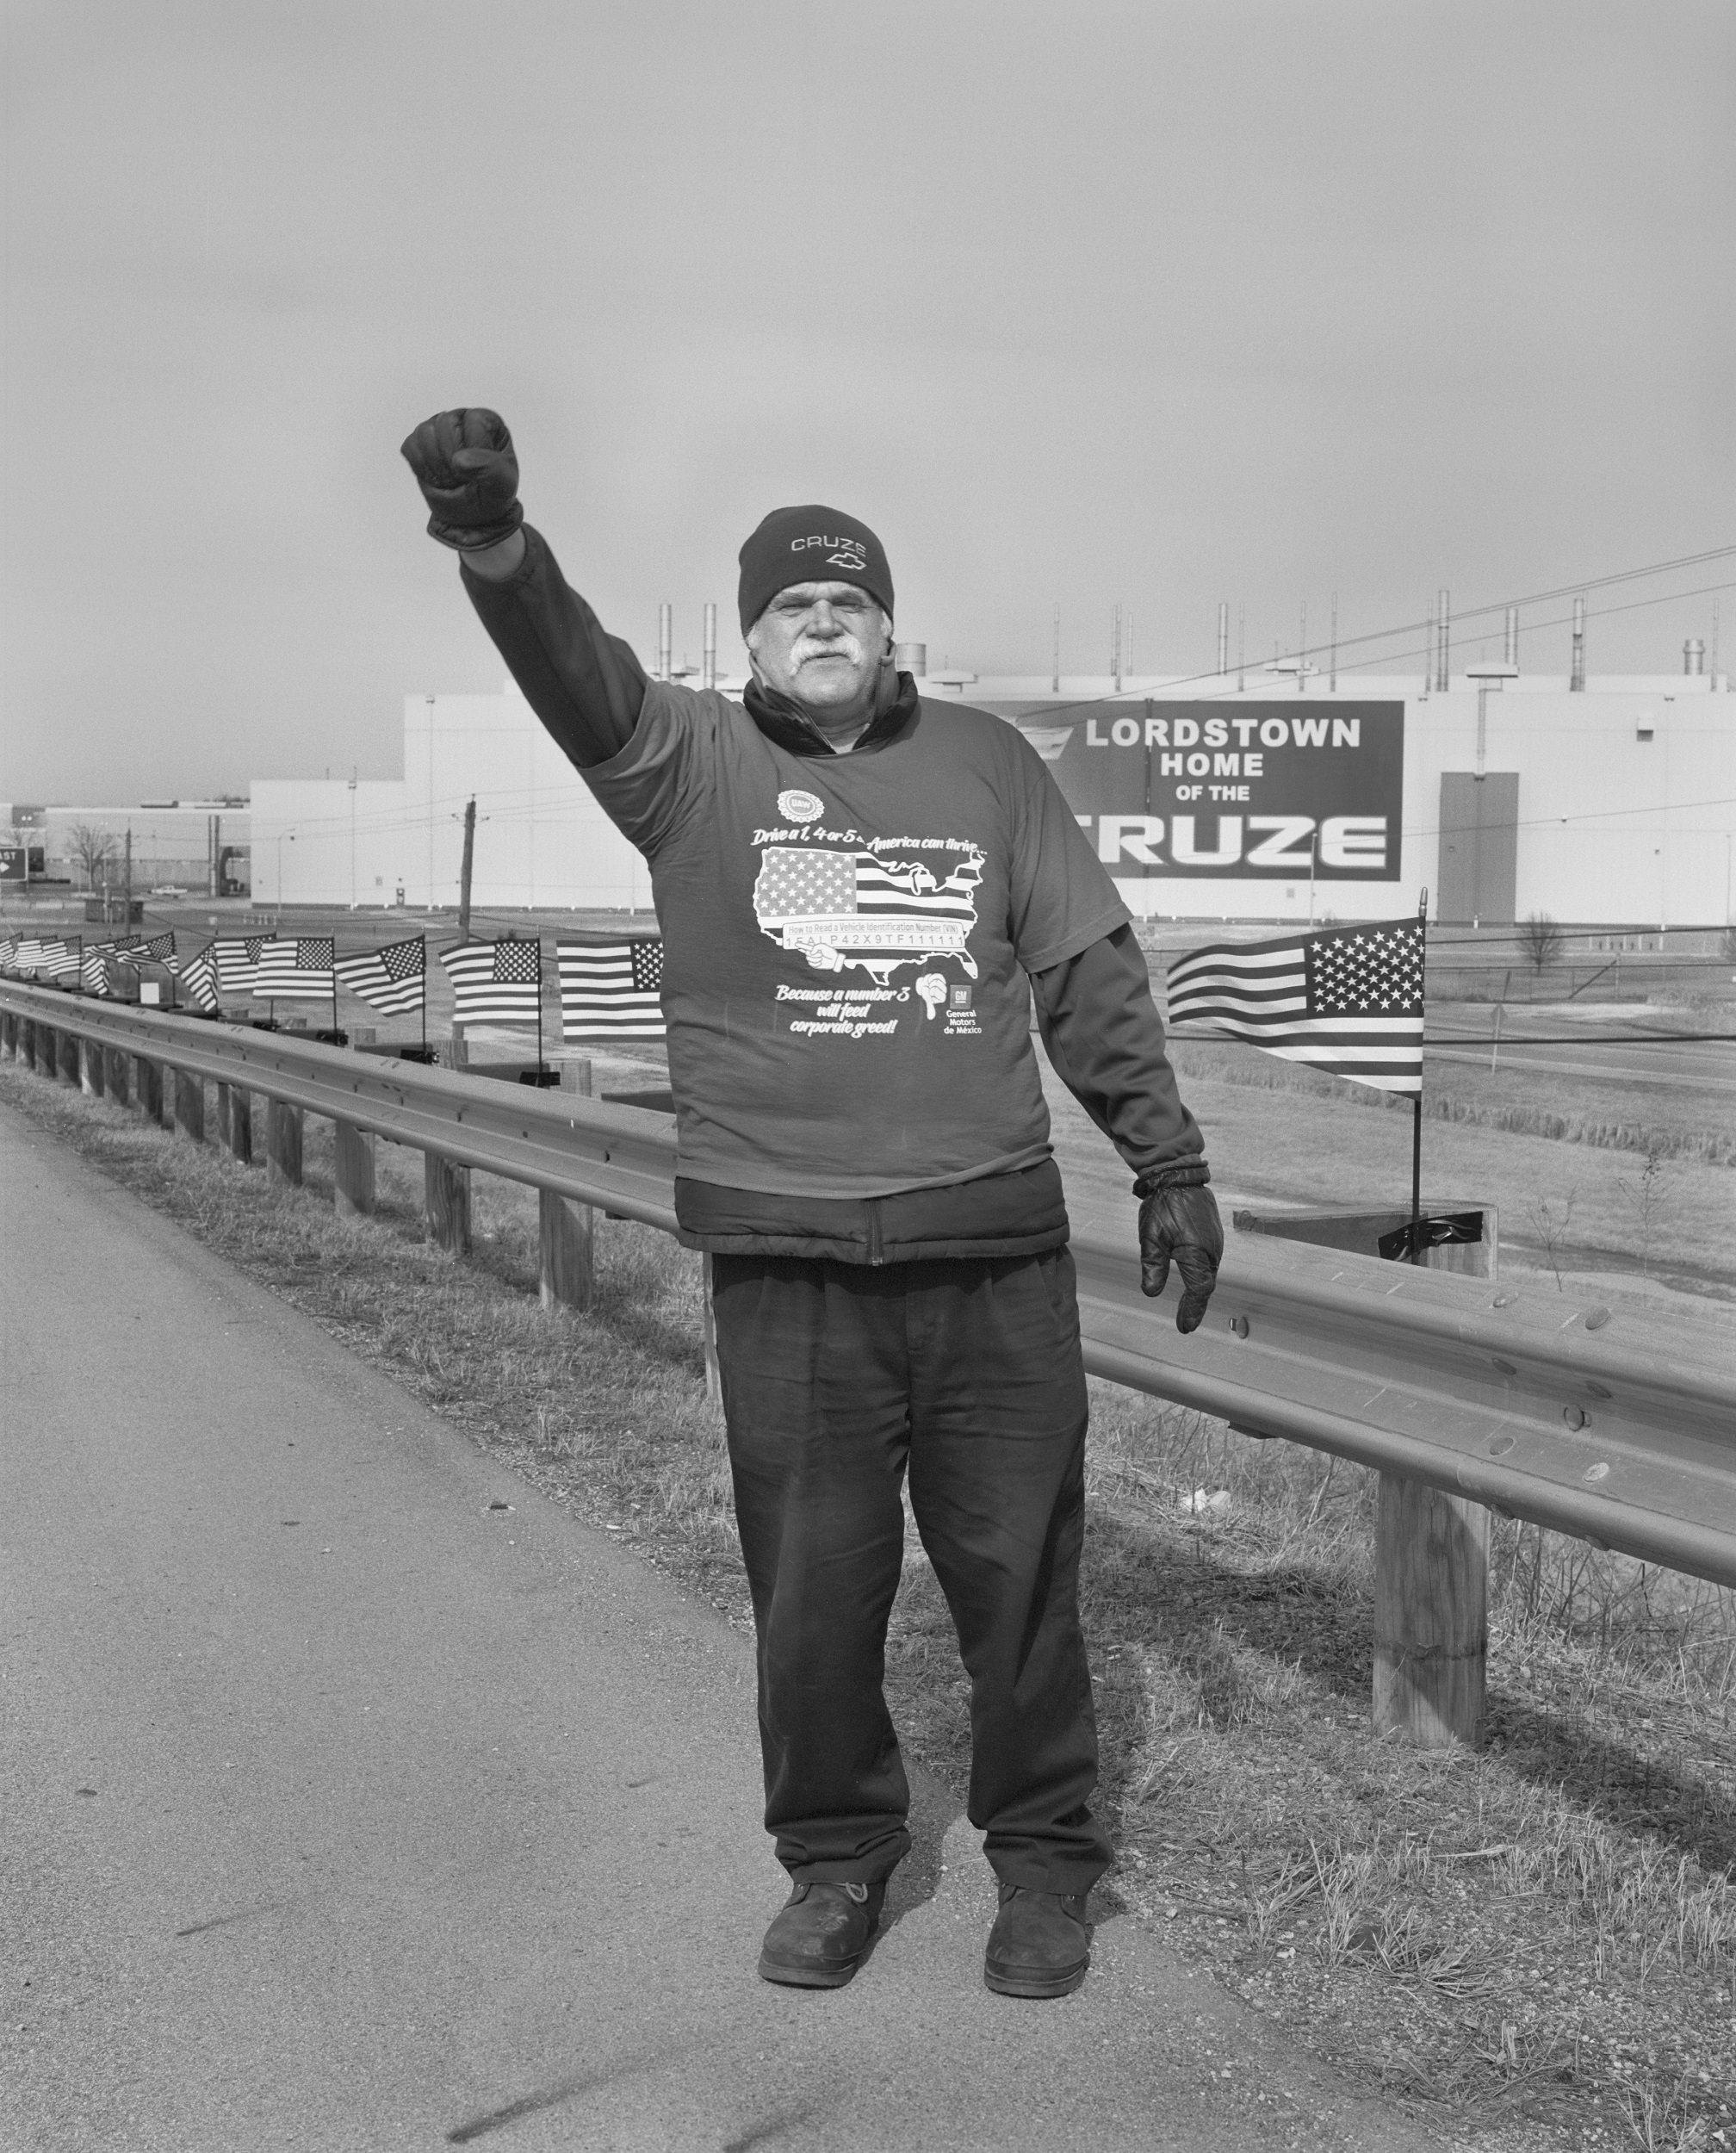 Black-and-white photograph of a middle-aged white man with a white beard standing in front of a sign reading "Lordstown Home of the Cruze" and raising his right fist to the sky.